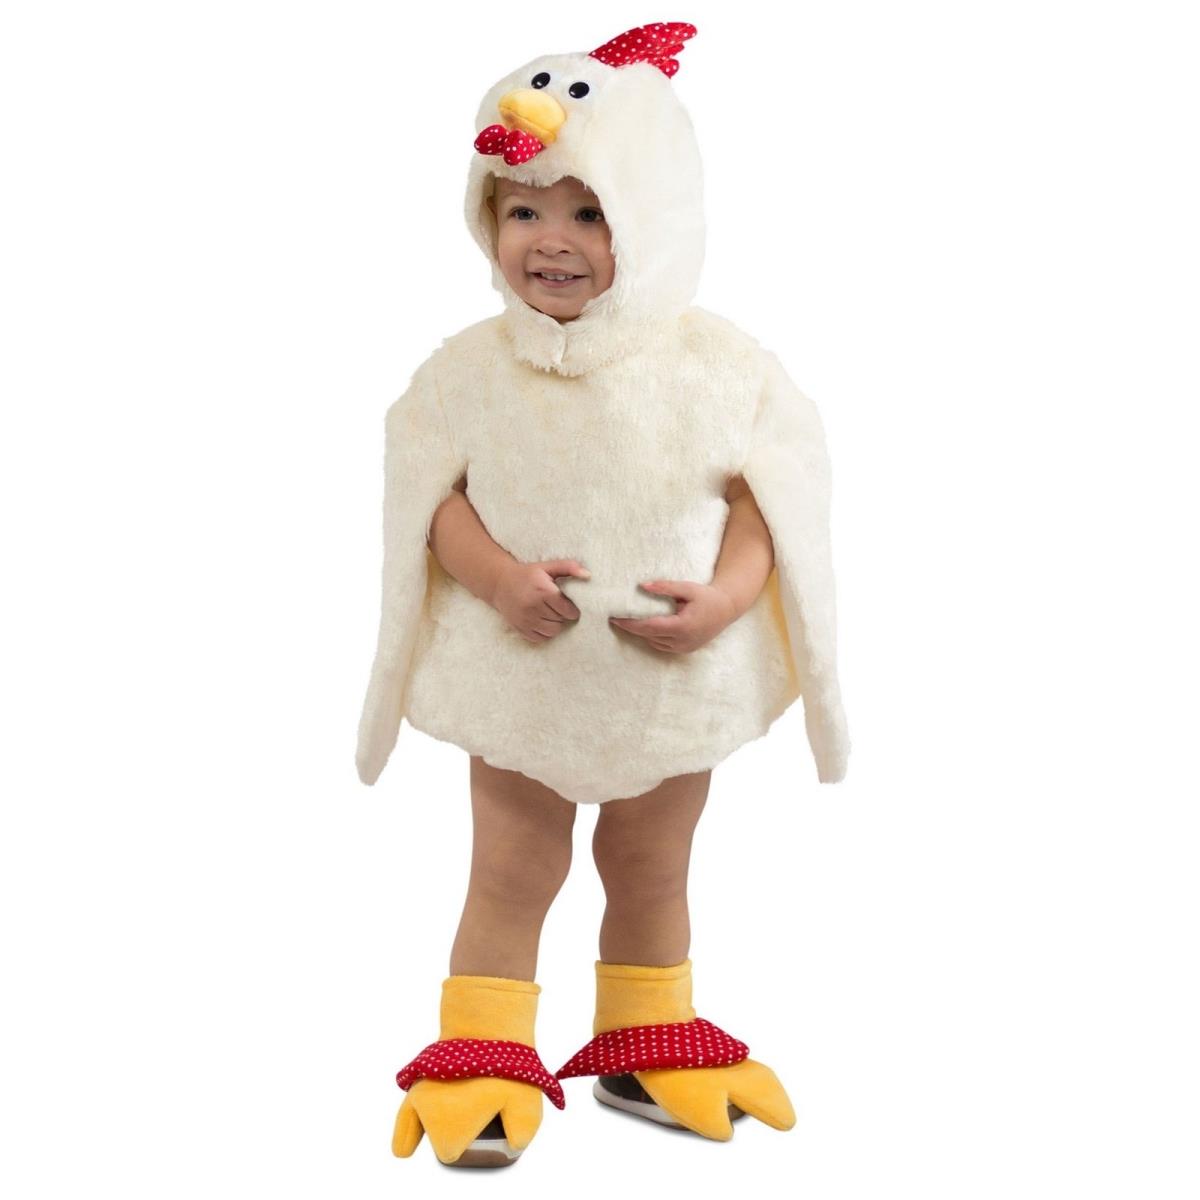 409990 Child Reese The Rooster Costume - Infant